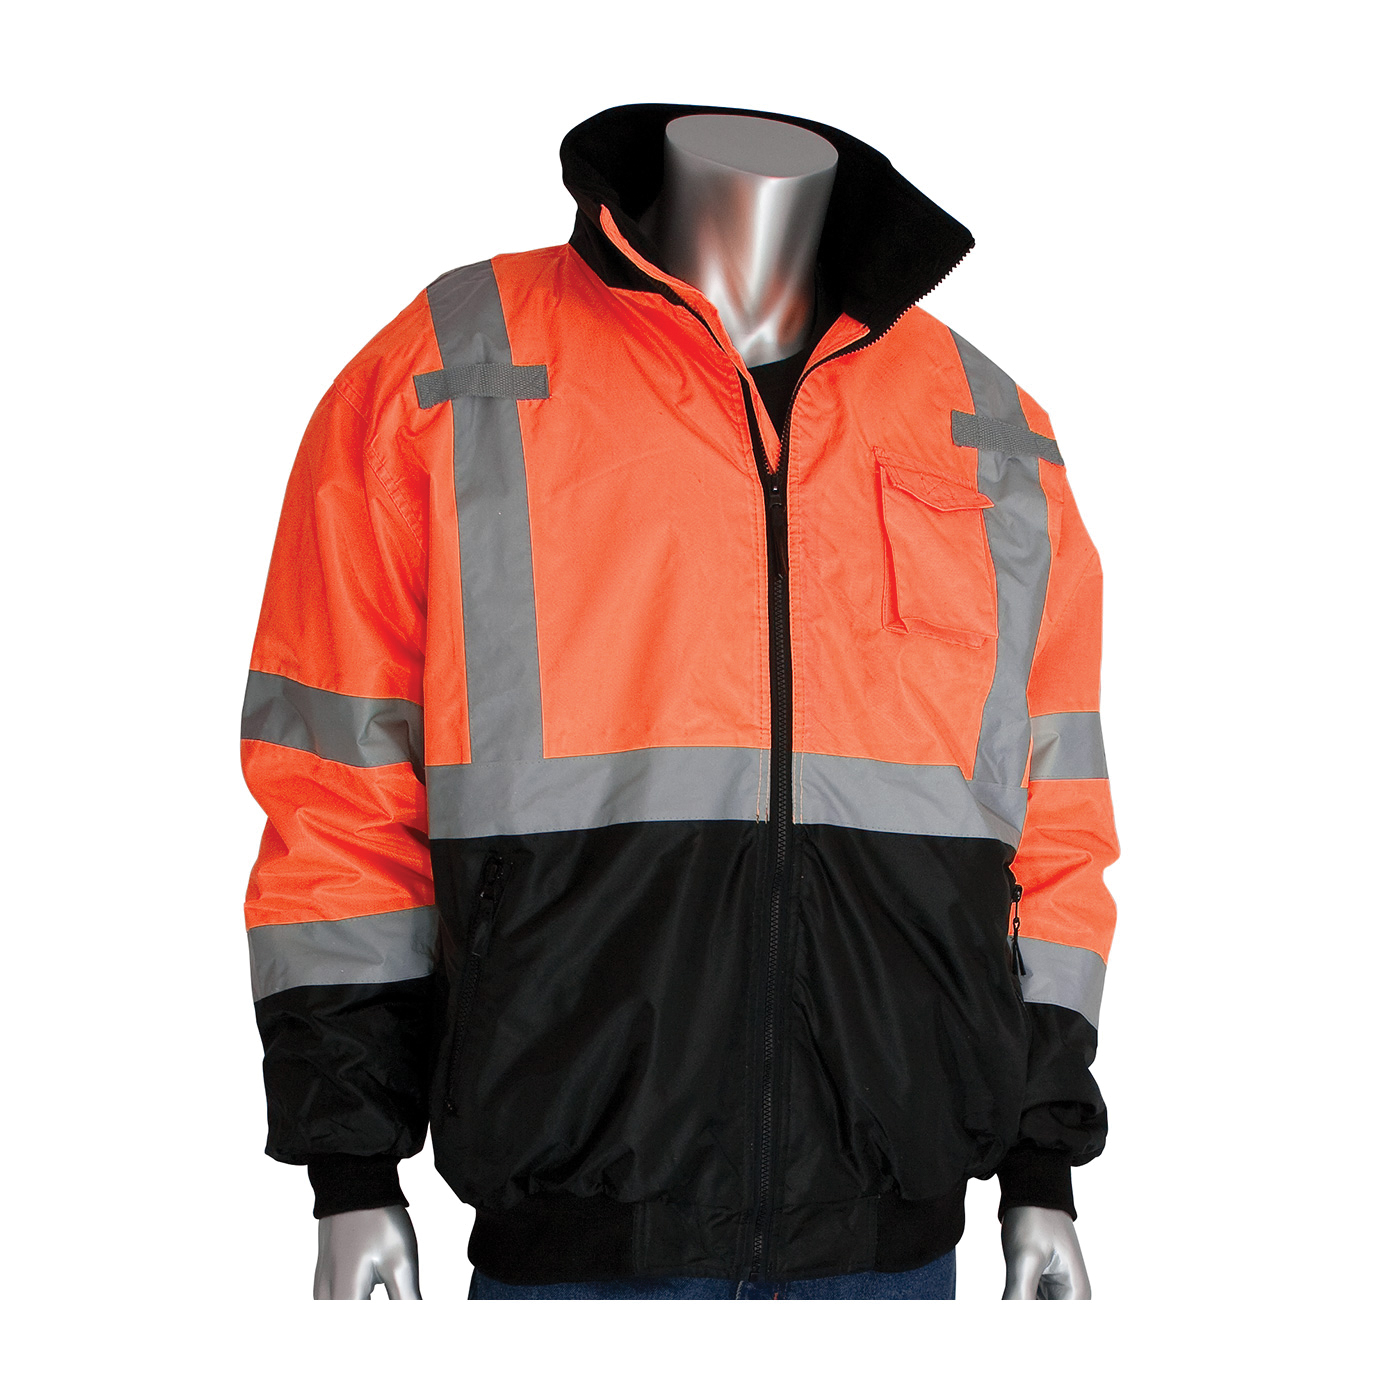 PIP® 333-1766-OR/5X Bomber Jacket With Zip-Out Fleece Liner, Hi-Viz Orange, Polyester, 74 in Chest, Resists: Water, Specifications Met: ANSI 107 Class 3 Type R